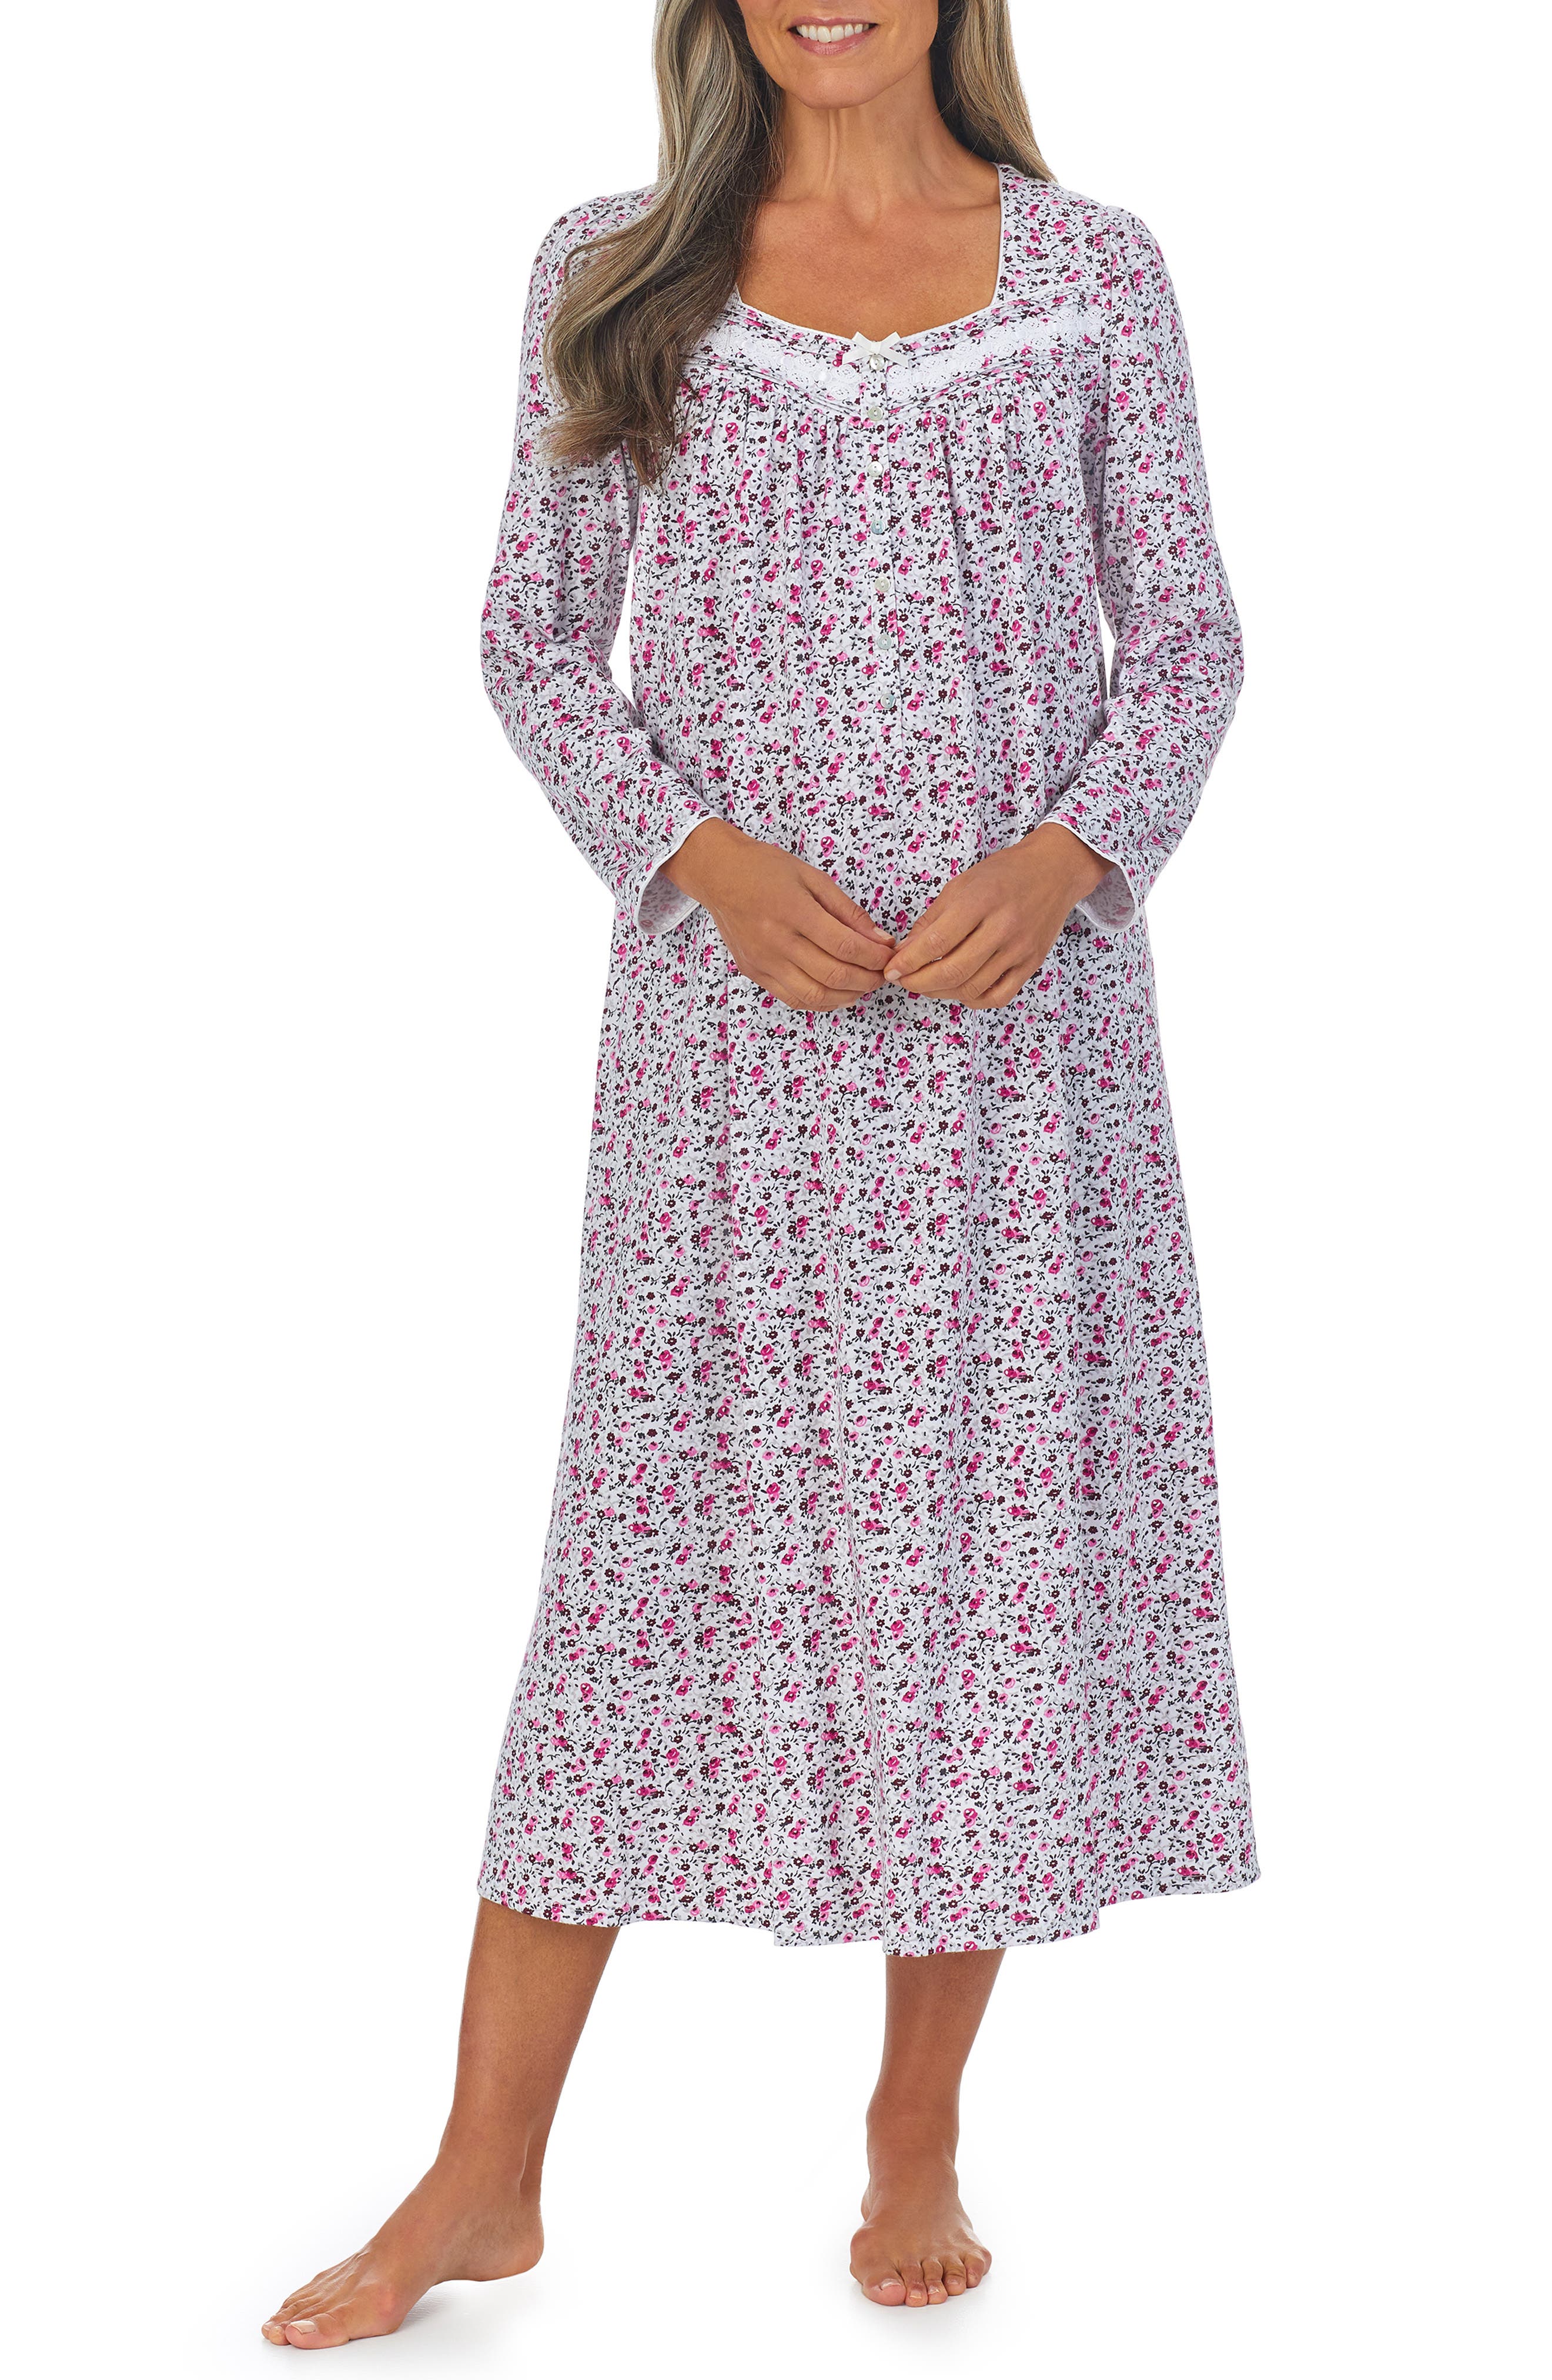 Adonna Woman's 3/4 Sleeve Long Nightgown Lavender Geo Print Large & X-Large